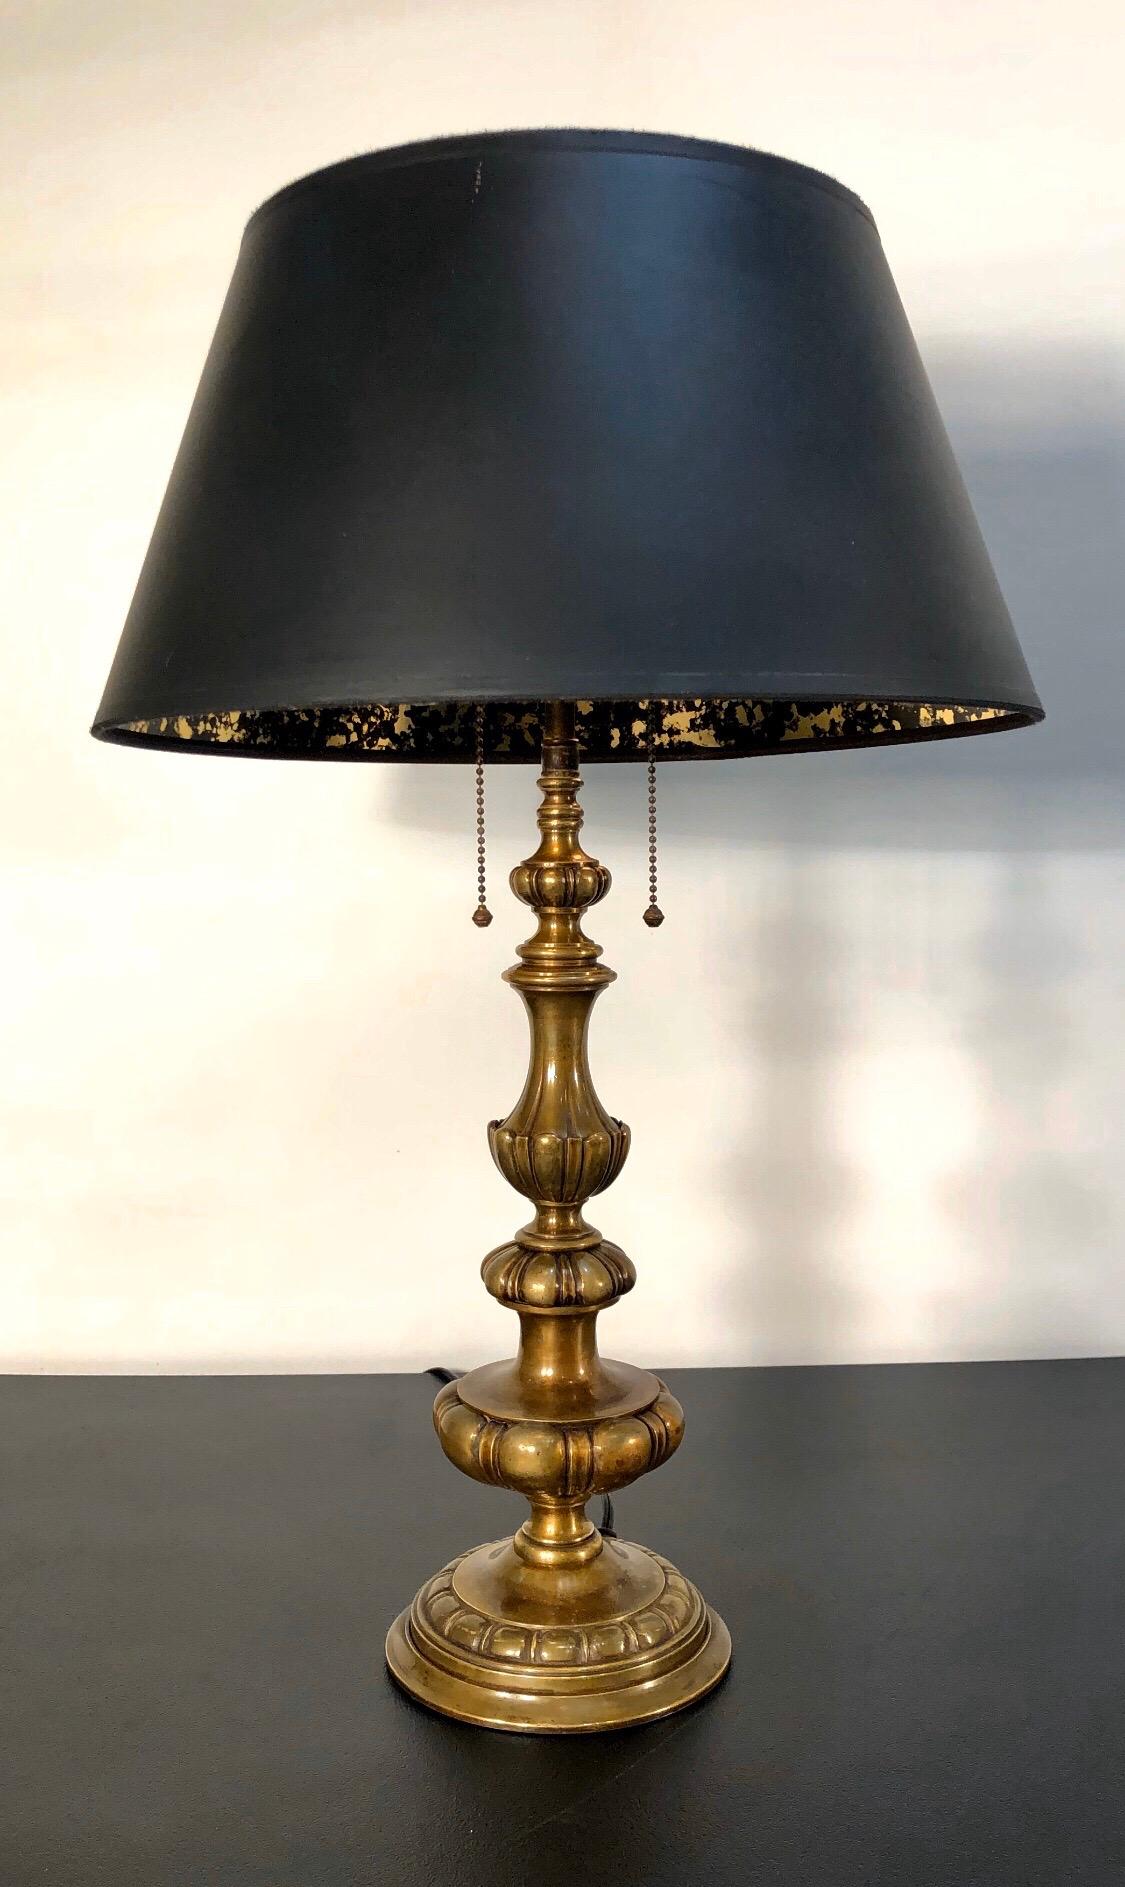 Elegant pair of Caldwell lamp in the Baroque style with Baluster stem that is finished in a beautiful hand rubbed bronze. These lamps come with the original two light cluster and acorn pull chains.